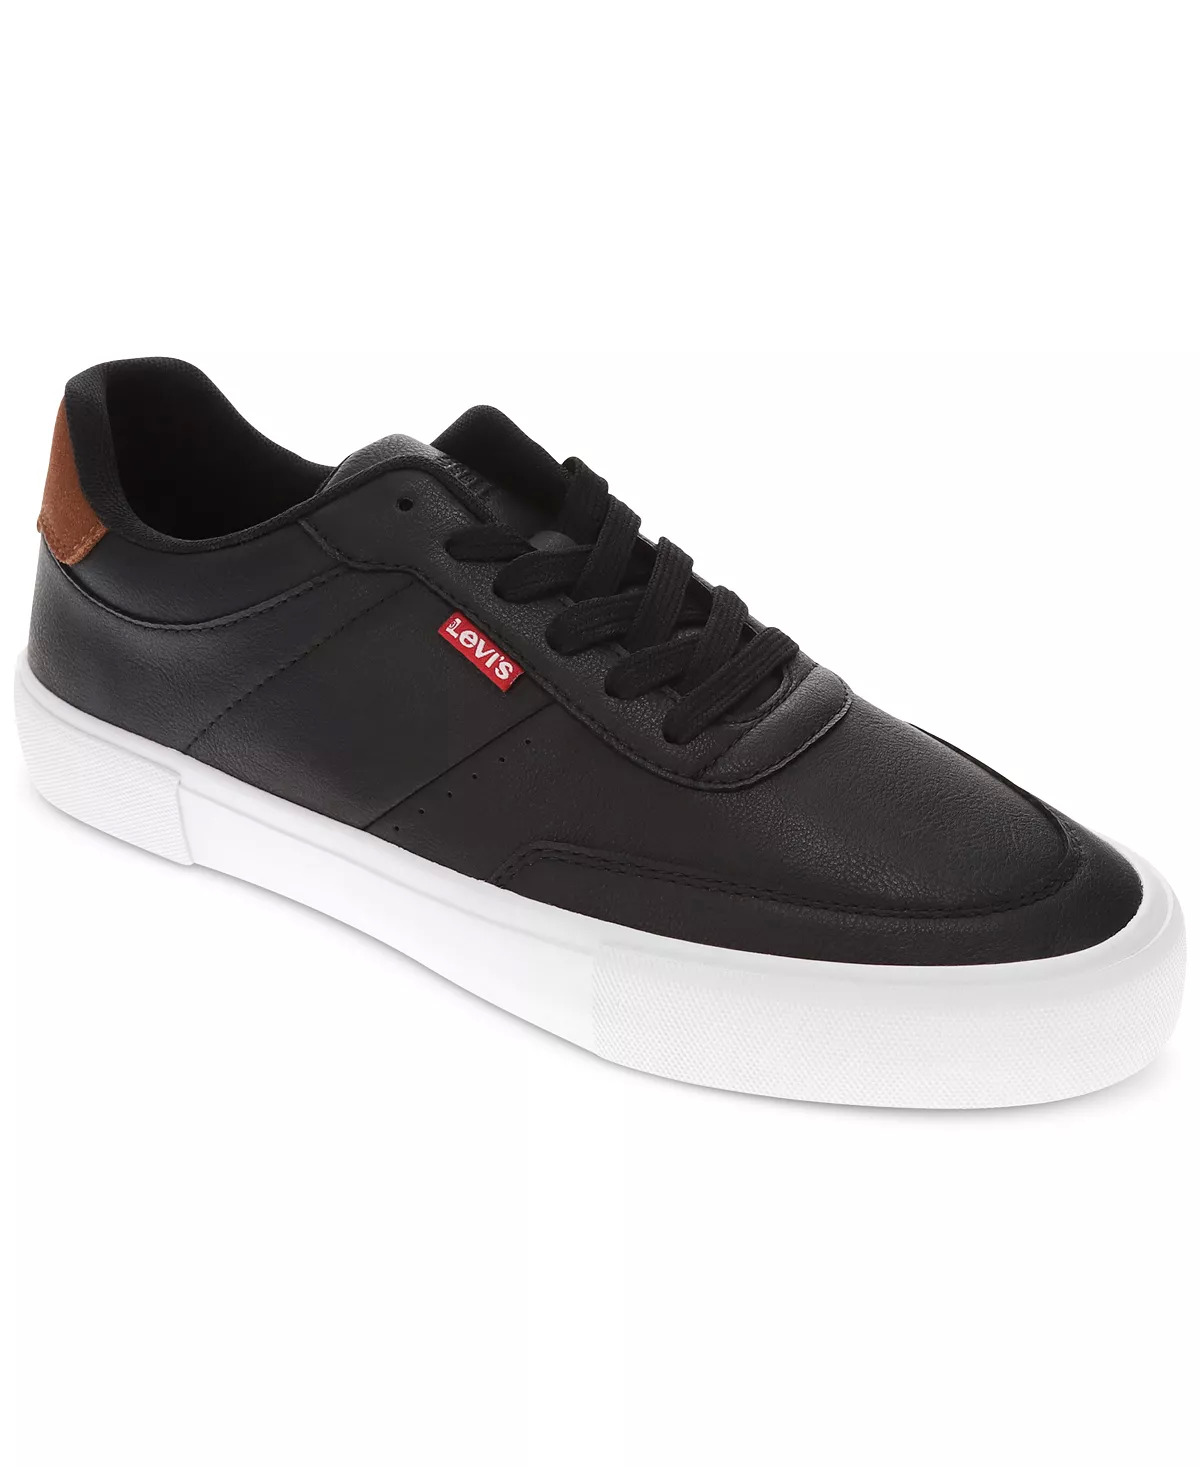 Levi's Men's Retro Low Sneakers $15, Club Elliot Boat Shoes $20, Kenneth Cole Oxford Shoes $20 & More + Free Store Pickup at Macy's or F/S on $25+